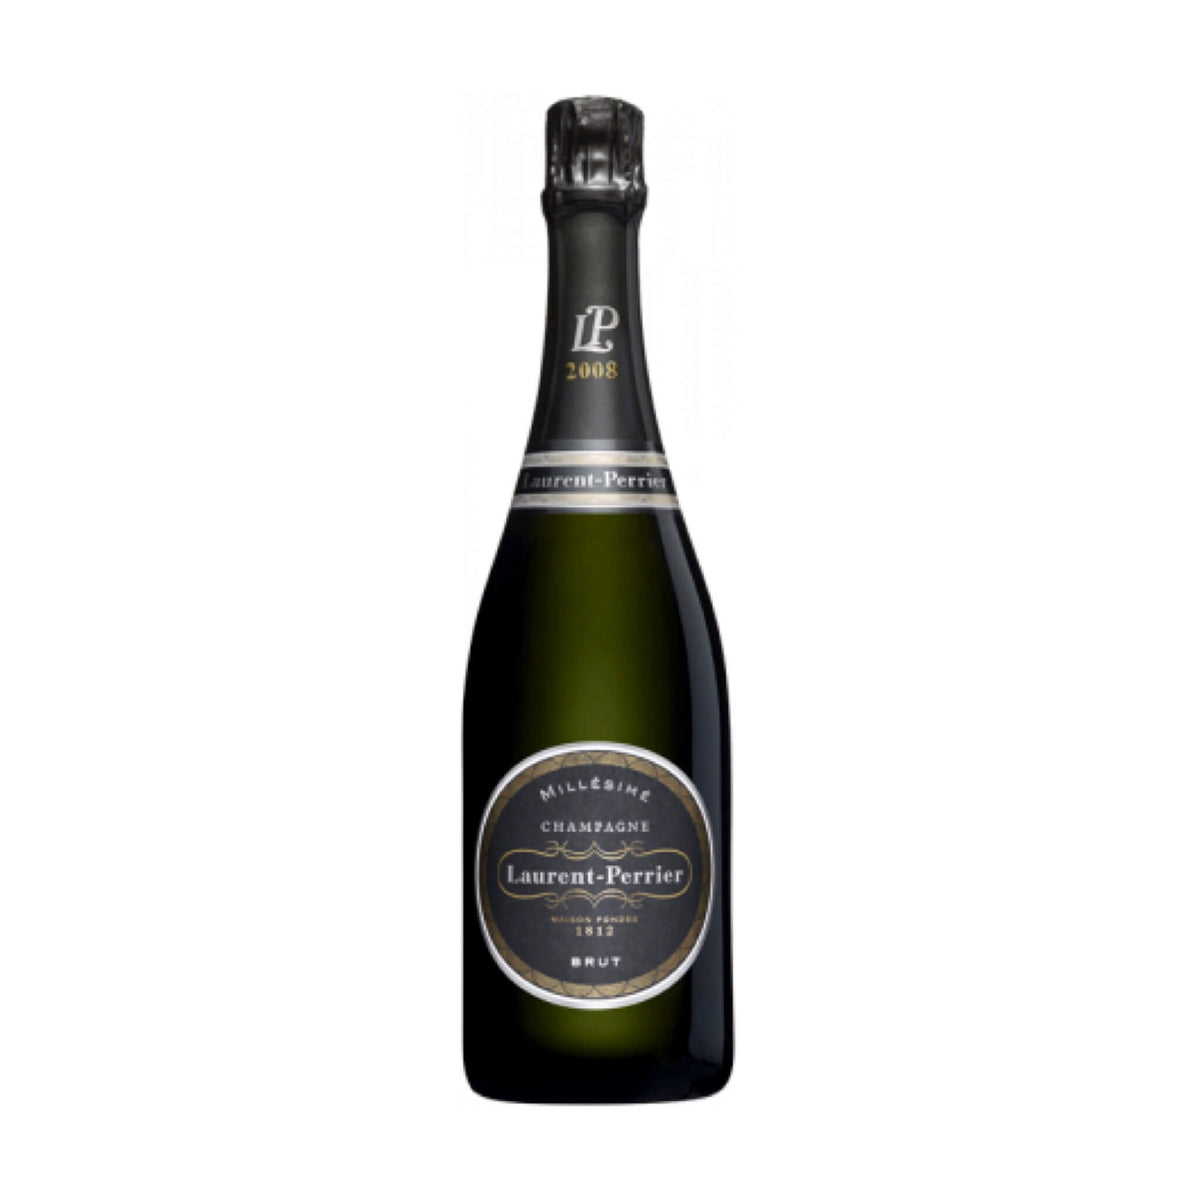 Champagne Laurent-Perrier-Champagner-Pinot Noir, Chardonnay-2012 Brut Millesime Champagne AOC-WINECOM